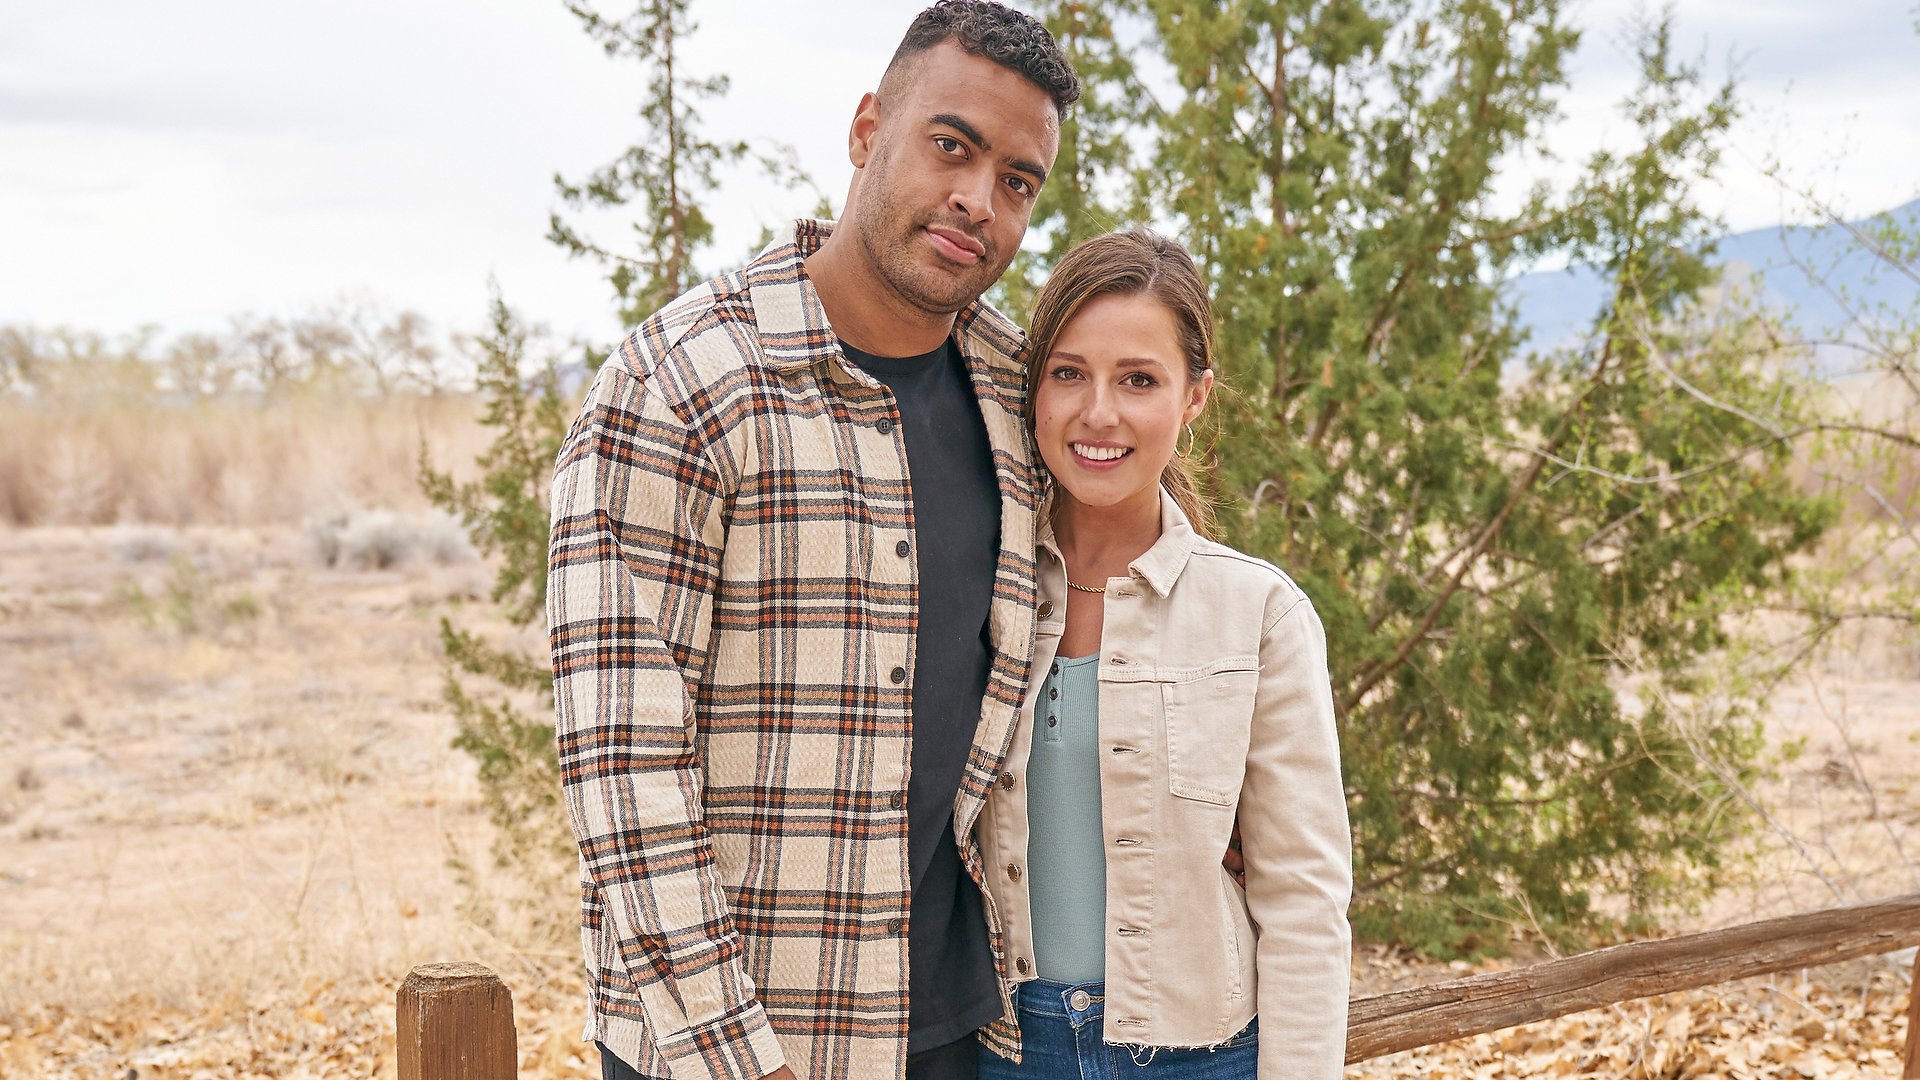 Justin Glaze and Katie Thurston pose together on their Hometown Date in ‘The Bachelorette’ Season 17 Week 9 